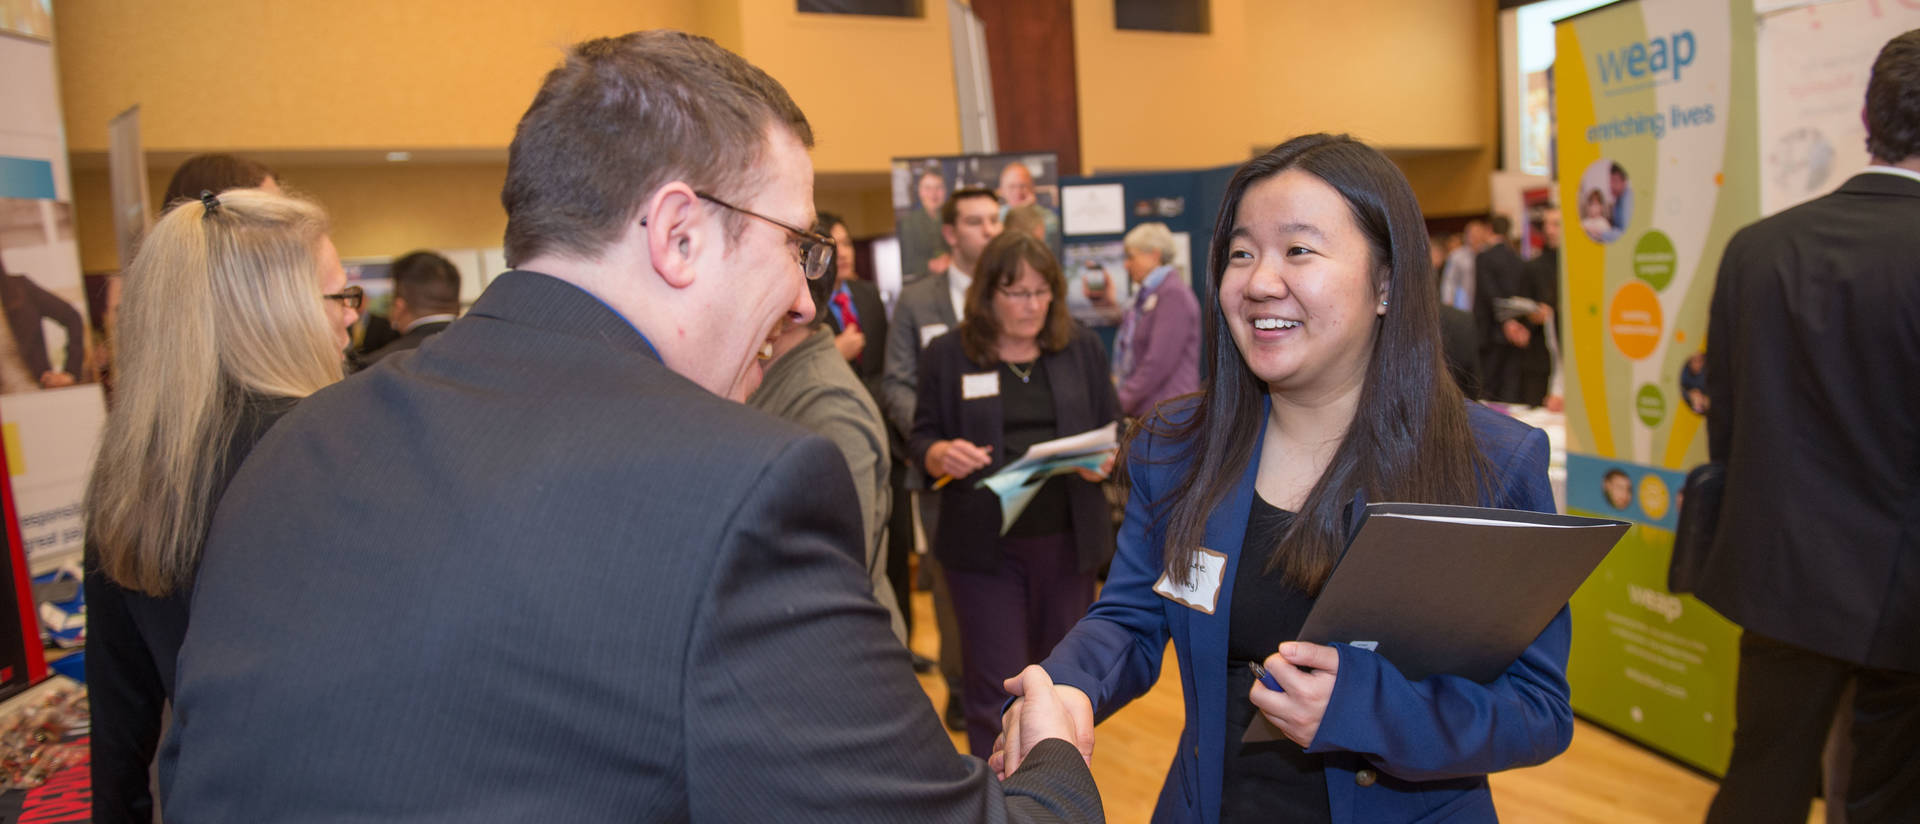 Student shaking hands at Career fair